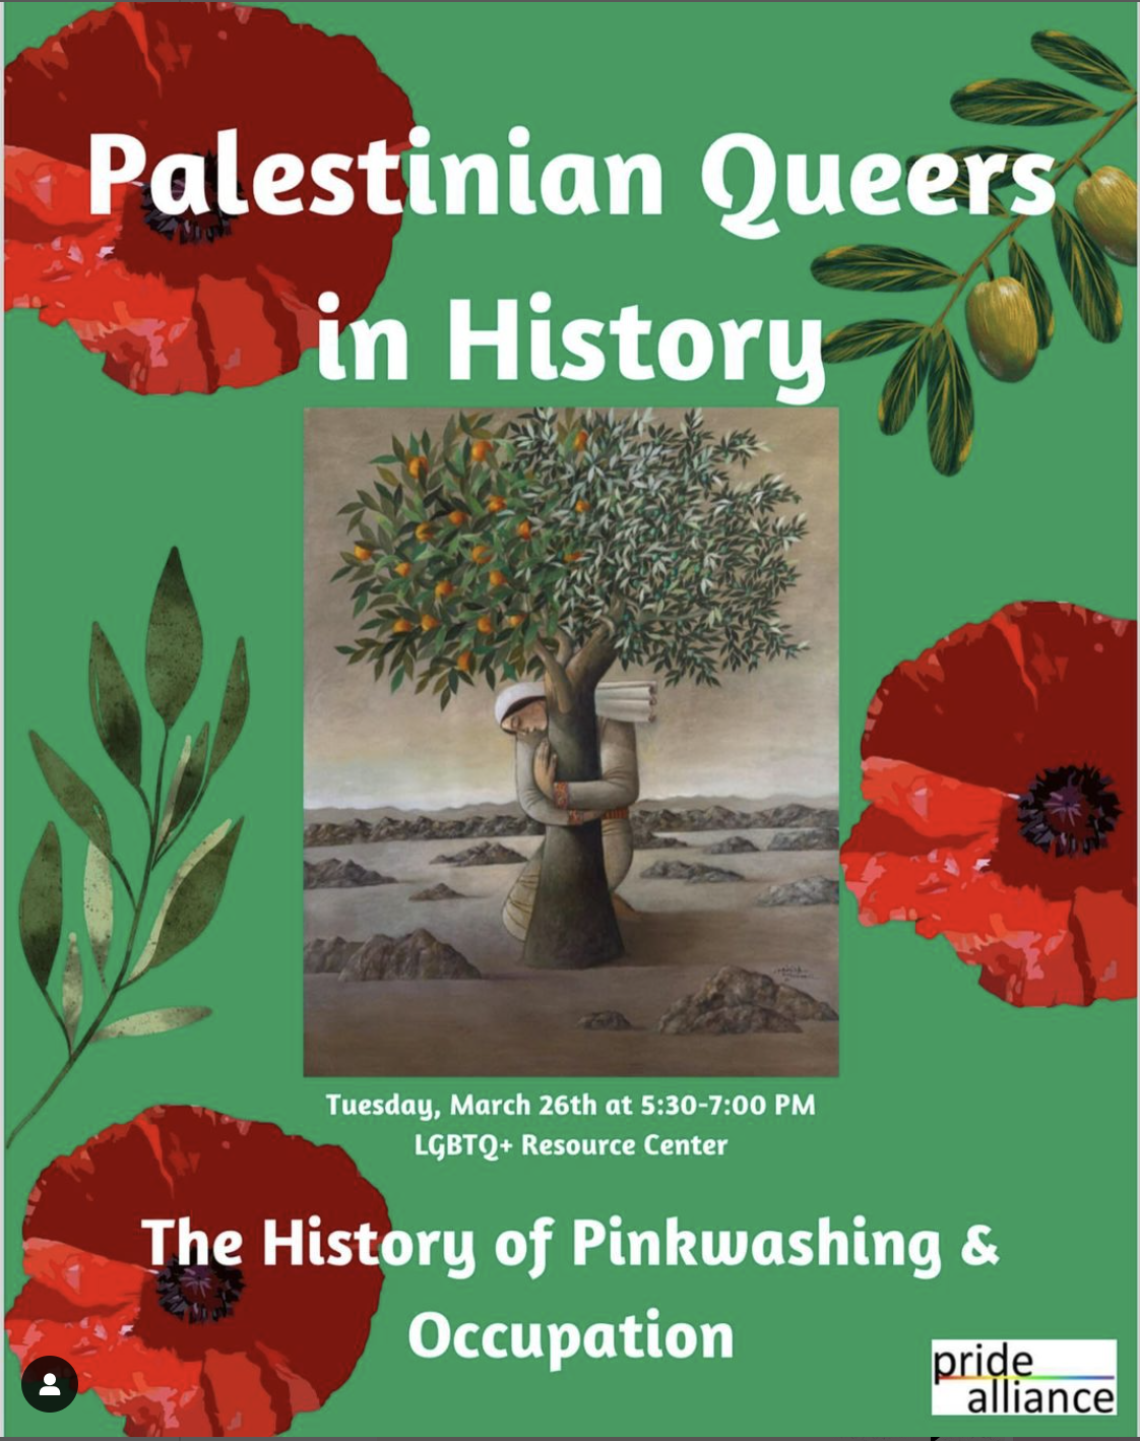 [ID: The image is a flier promoting the event “Palestinian Queers in History” at the LGBTQ+ Resource Center on Tuesday, March 26th from 5:30-7:00 PM. The event will cover topics such as the History of Pinkwashing & Occupation hosted by Pride Alliance. The poster features white text, green background, an image of olive tree branches, red poppies, and a picture of a Palestinian woman hugging an olive tree.]